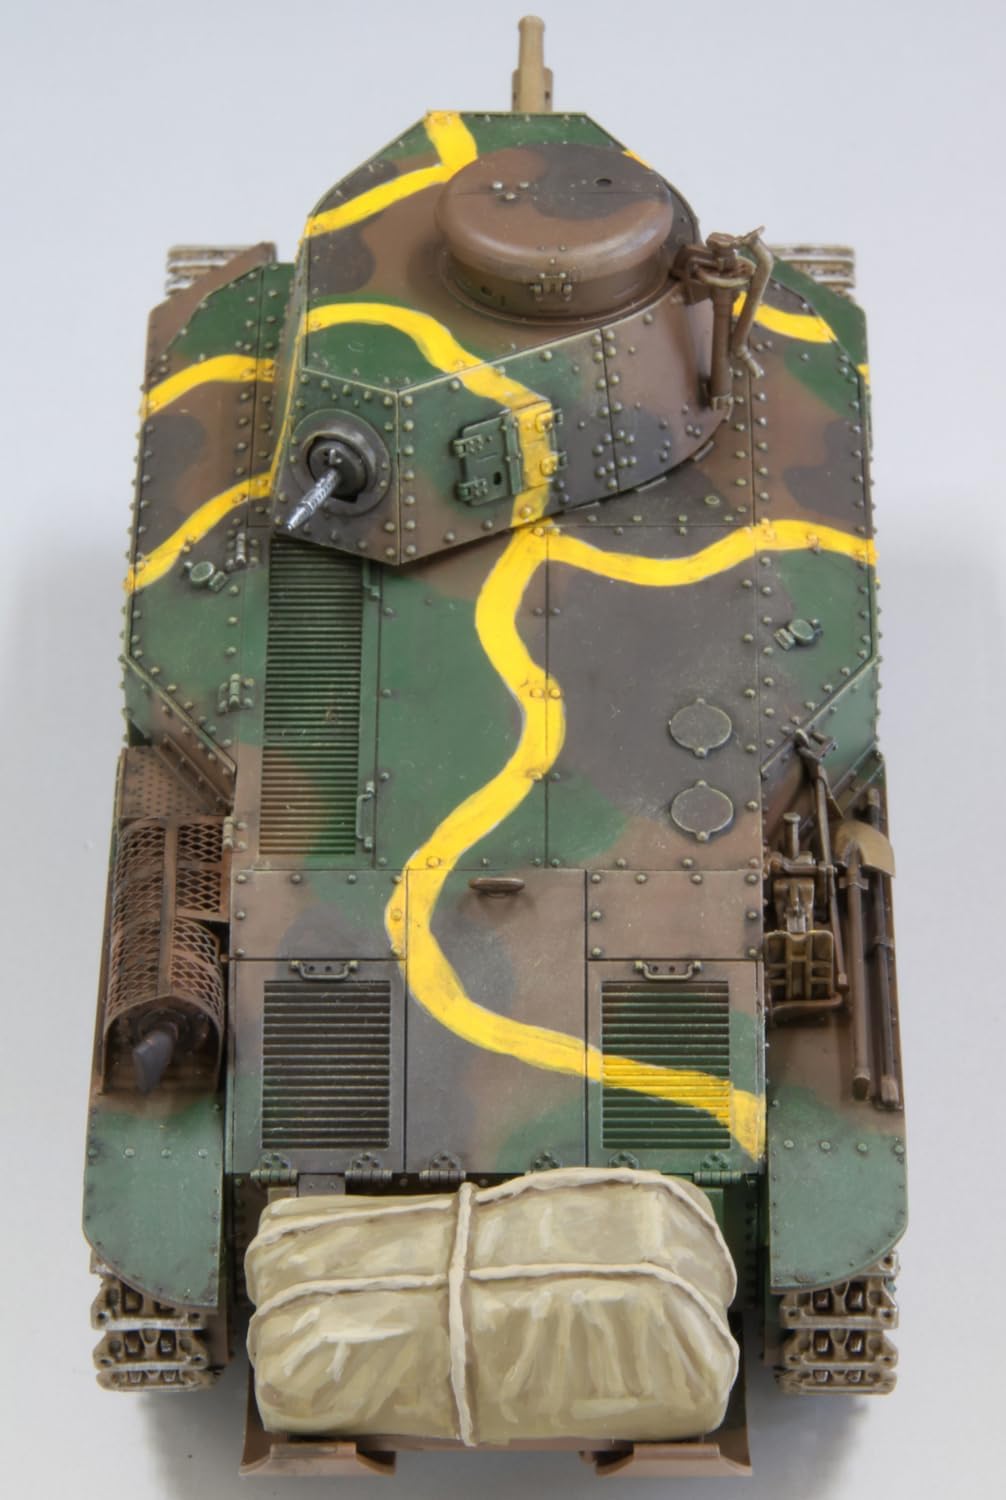 Fine Mold FM62 1/35 Military Series Imperial Army Type 89 Medium Tank, Equipped with Luggage - BanzaiHobby